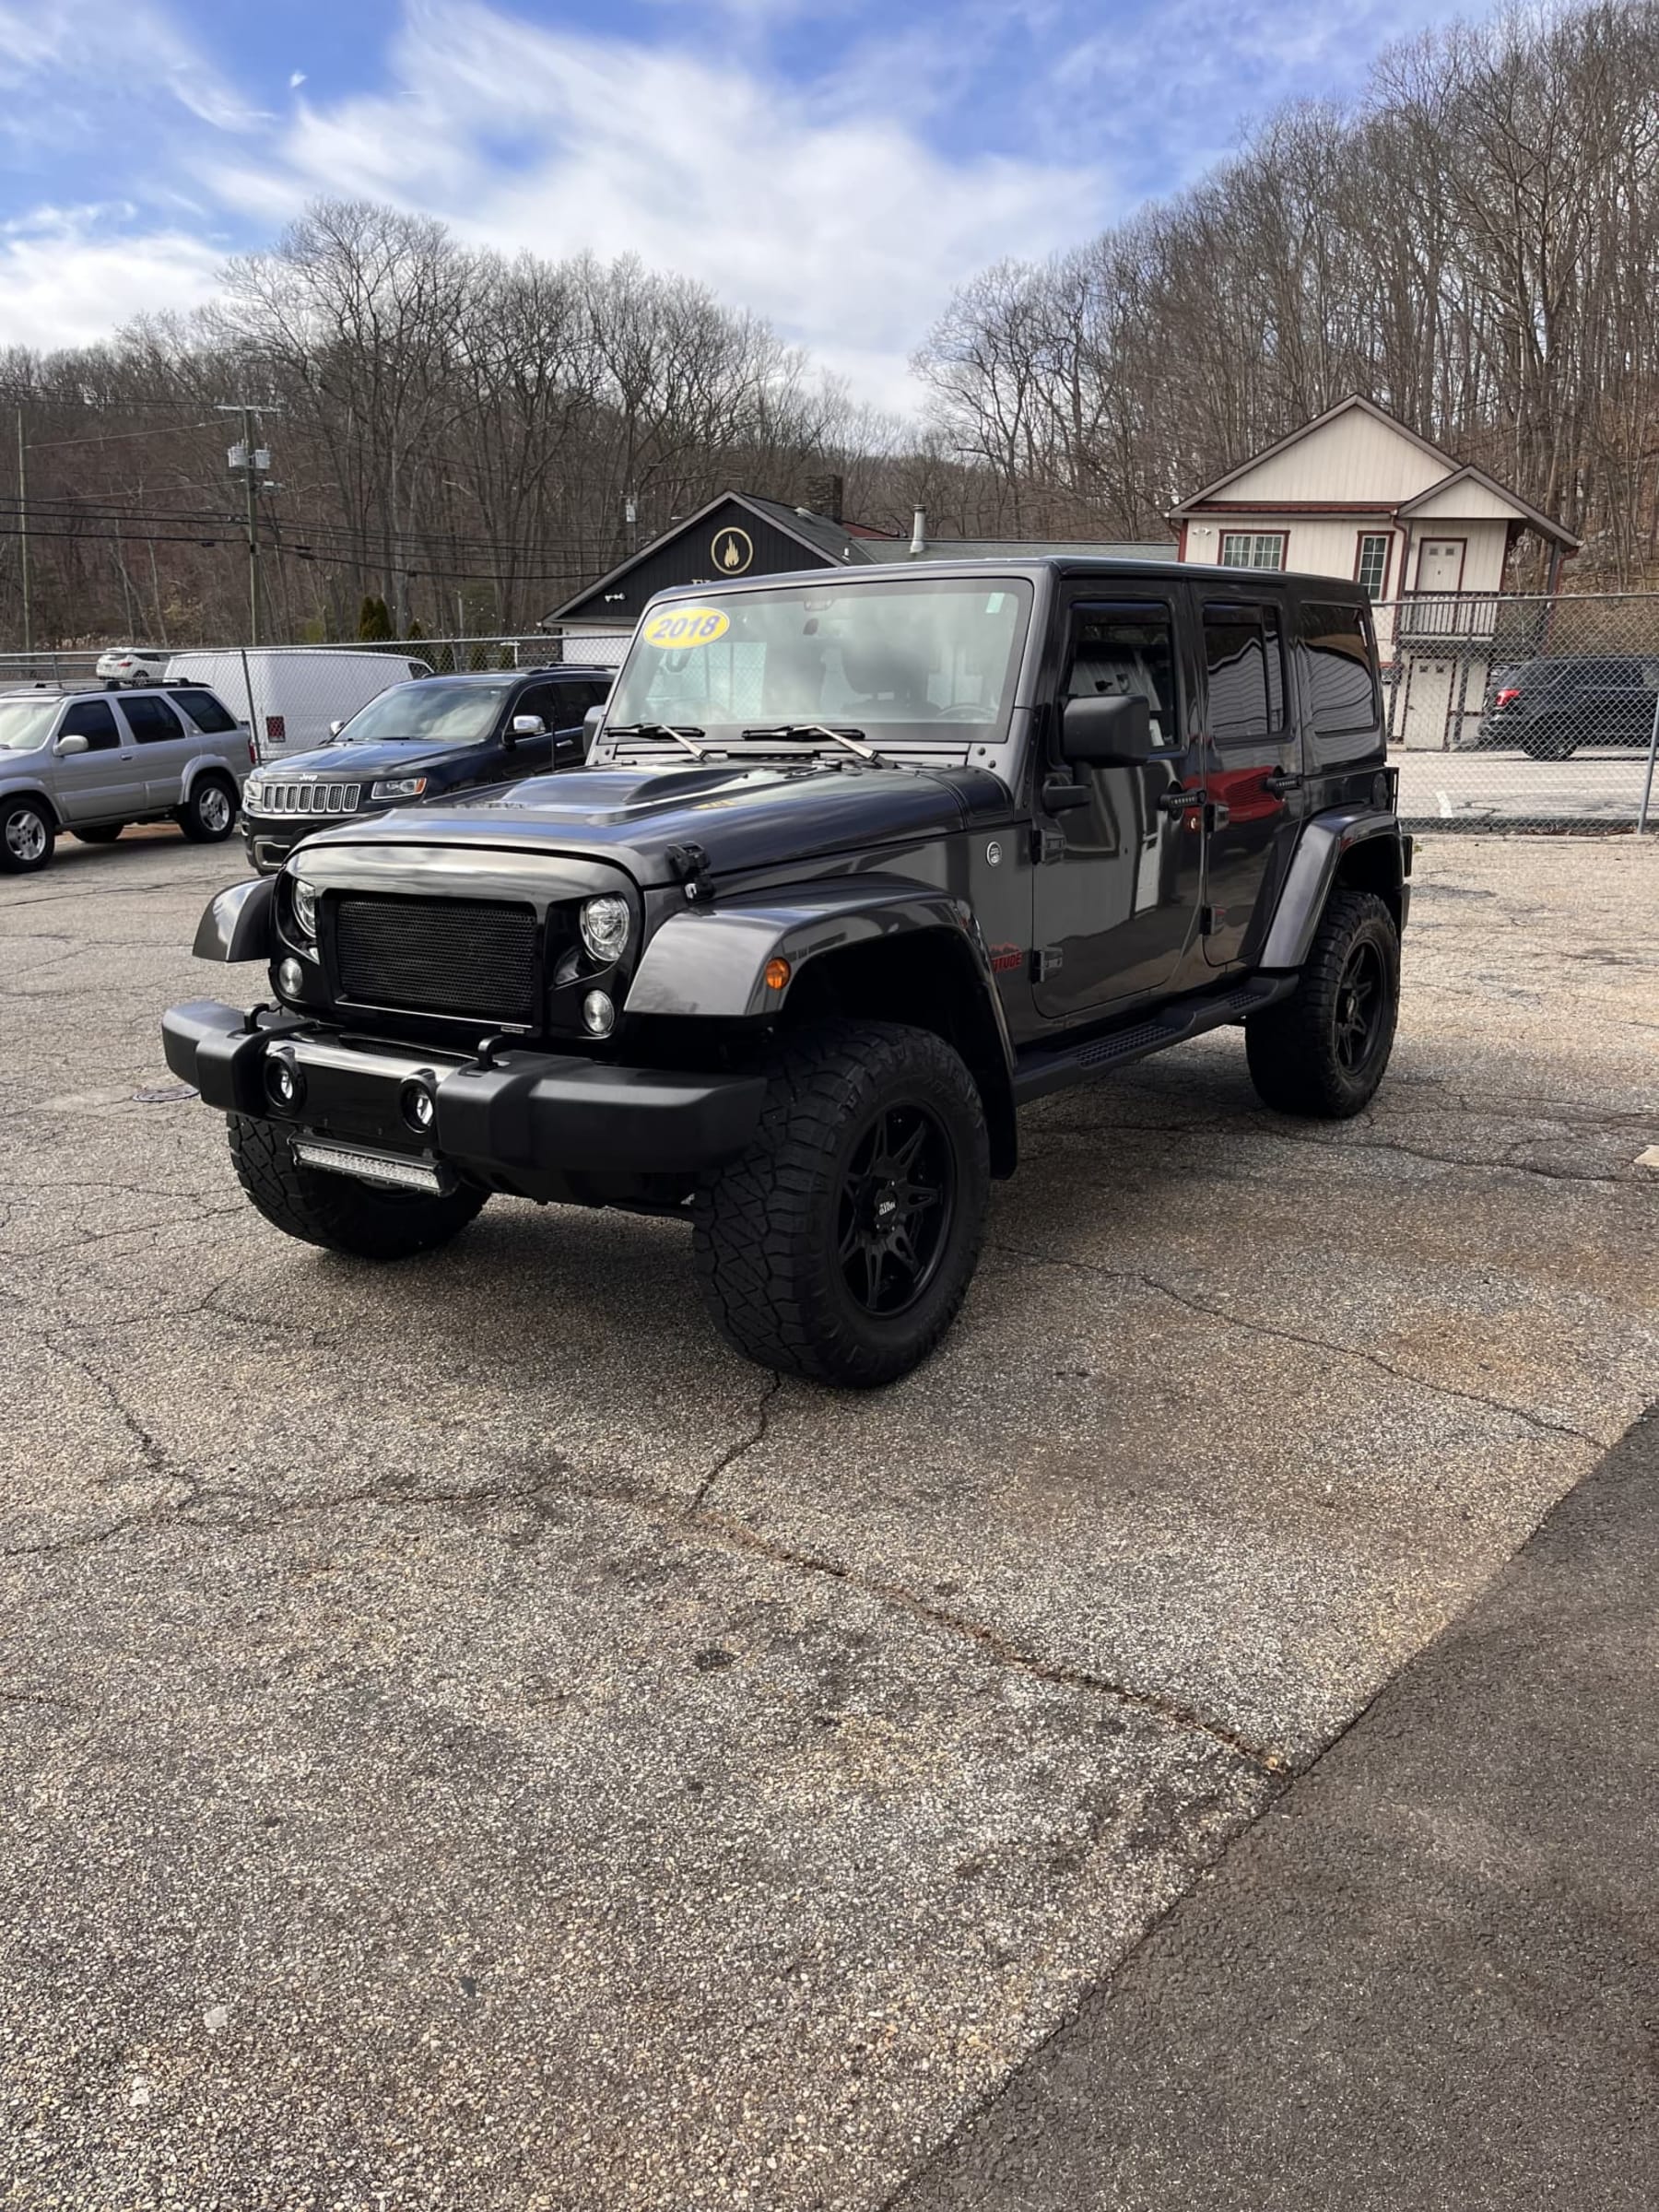 NEW ARRIVAL!! 2018 Jeep Unlimited Altitude!! Clean car fax! ONLY 43,800 miles!! Heated leather seats, lift, wheels and tires, backup camera, body color matching hard top, remote start and many extras!! Looks and runs great! Won’t last at $29,900!!